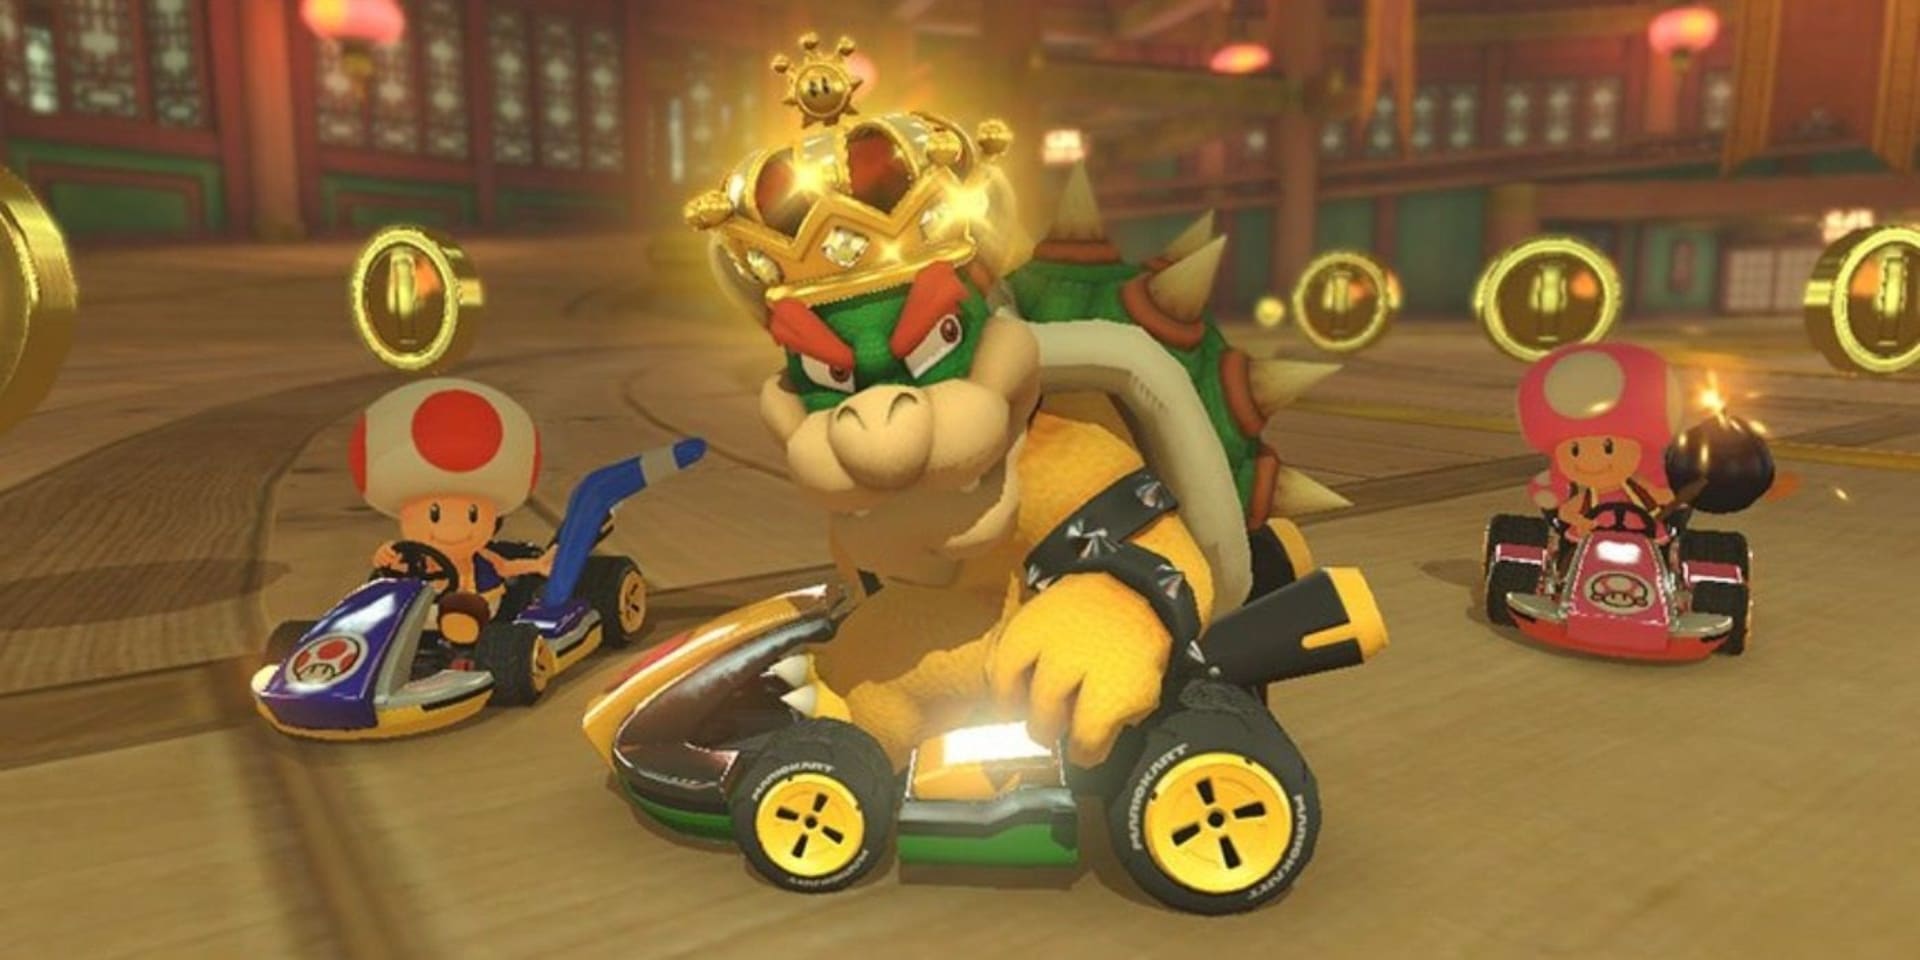 Mario-Kart-8-Deluxe-Bowser-Coins-Cover-GamersRD (1)